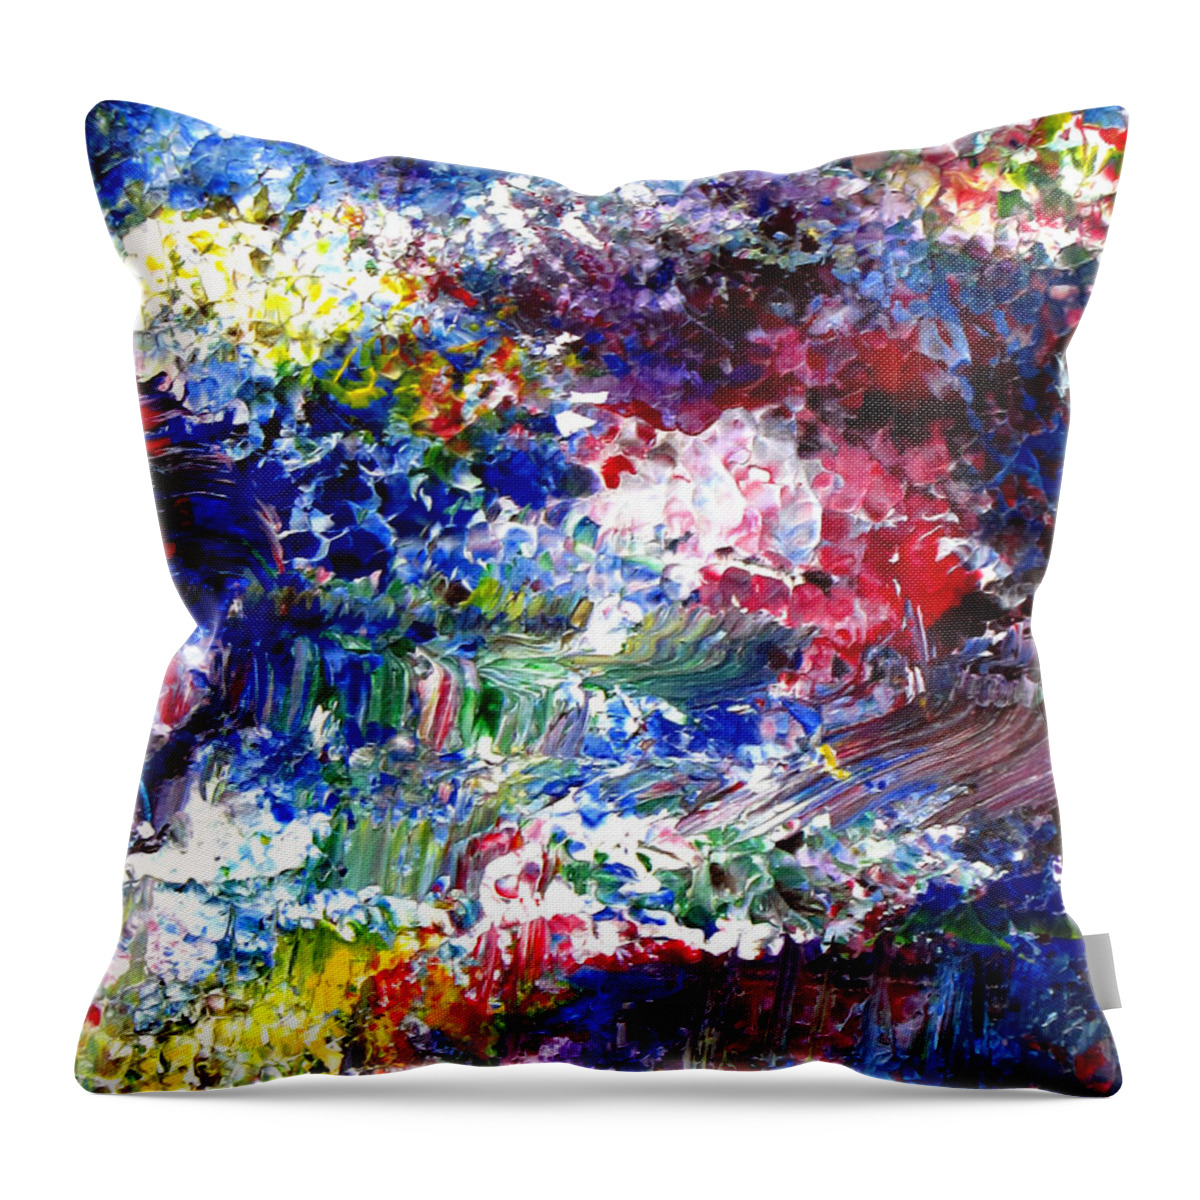 Mas Art Studio Throw Pillow featuring the painting Abstract Series 070815 A2 by Mas Art Studio